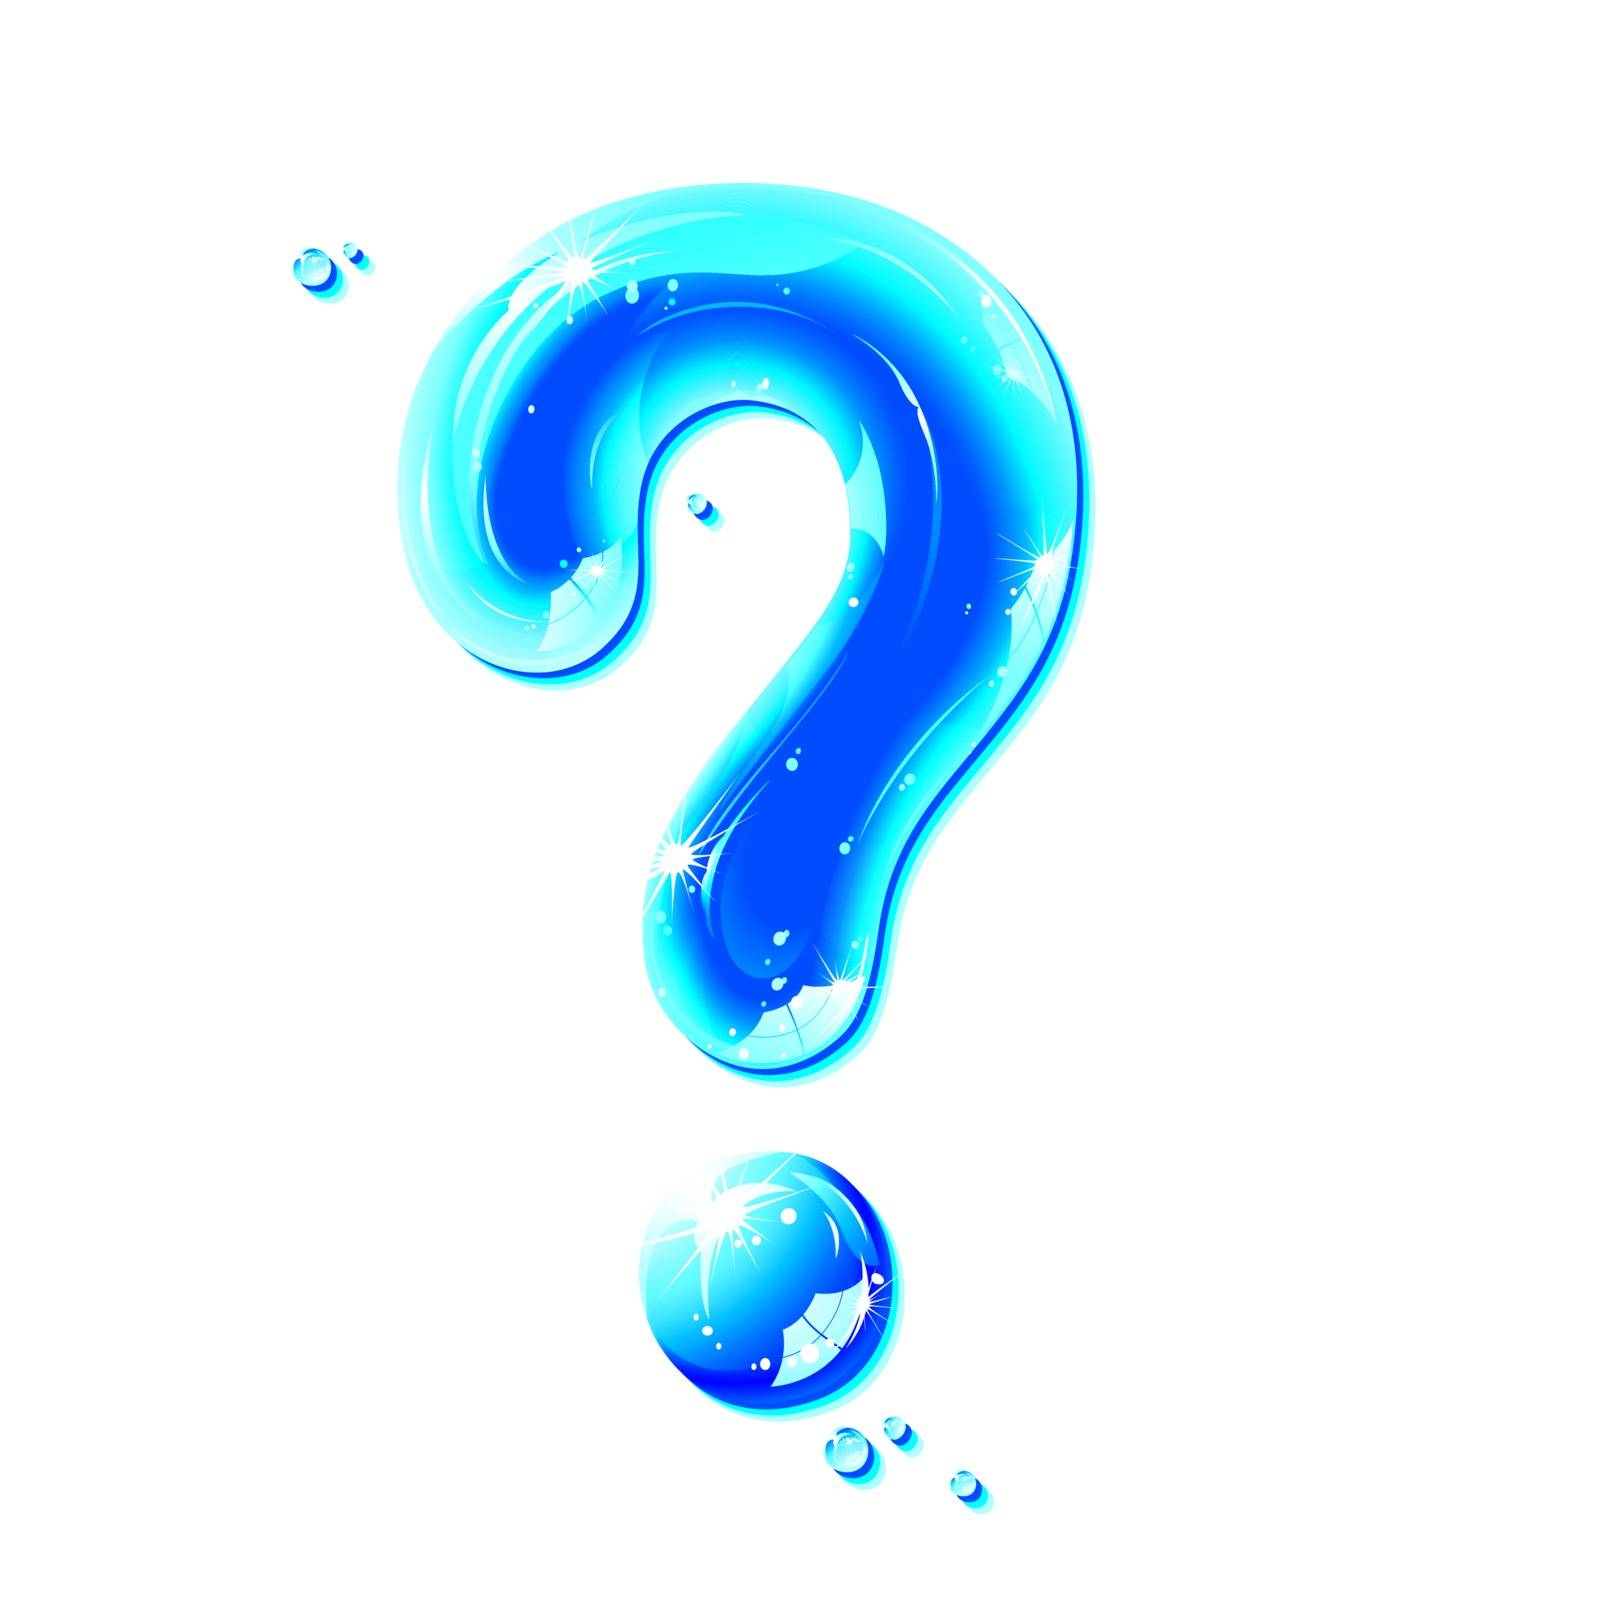 ABC series - Water Liquid Punctuation Marks - Question Mark by Julja